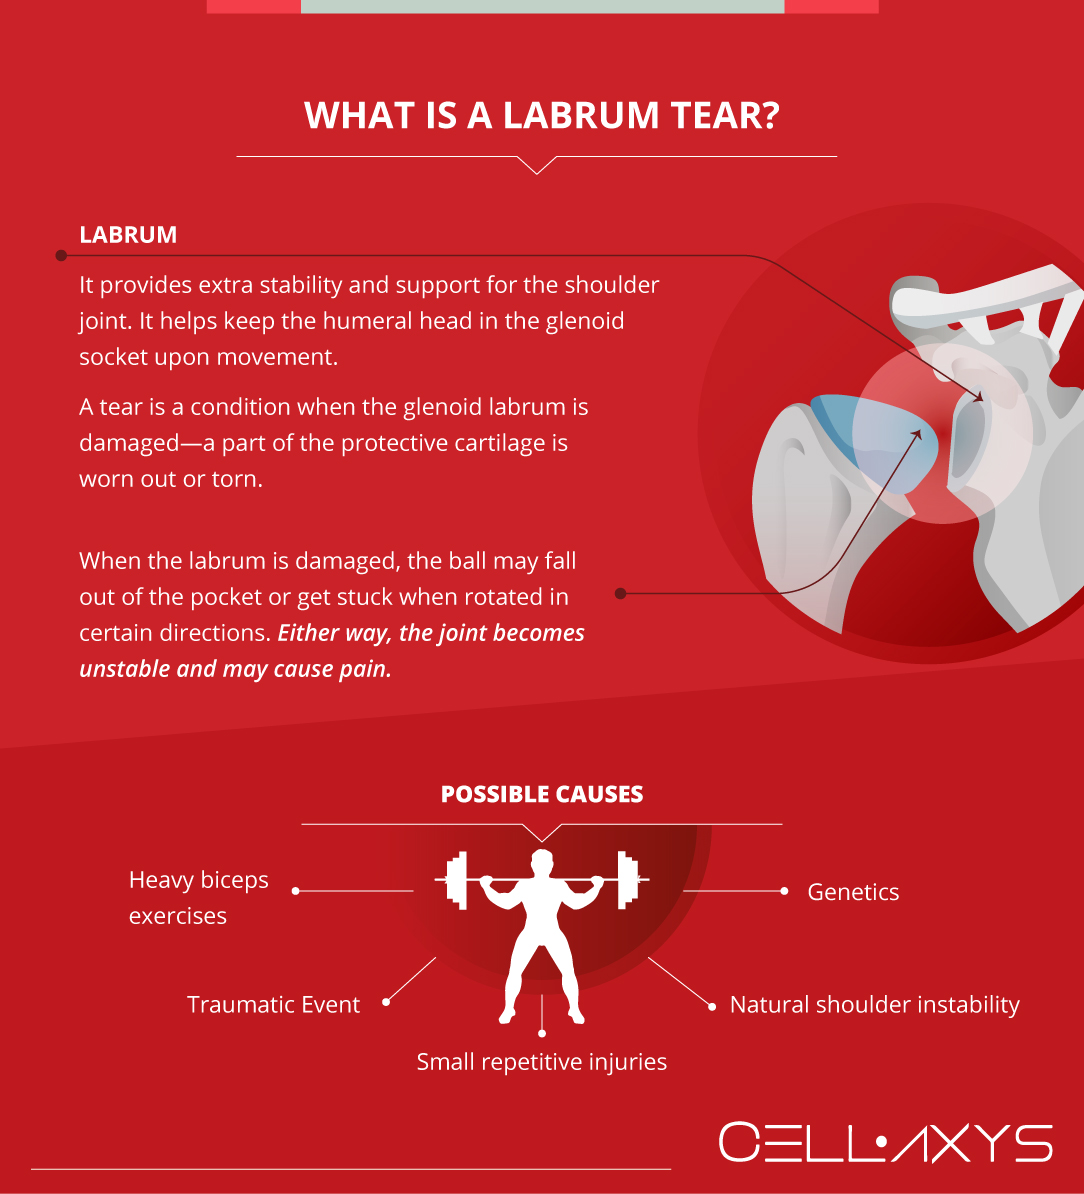 What Is a Labrum Tear